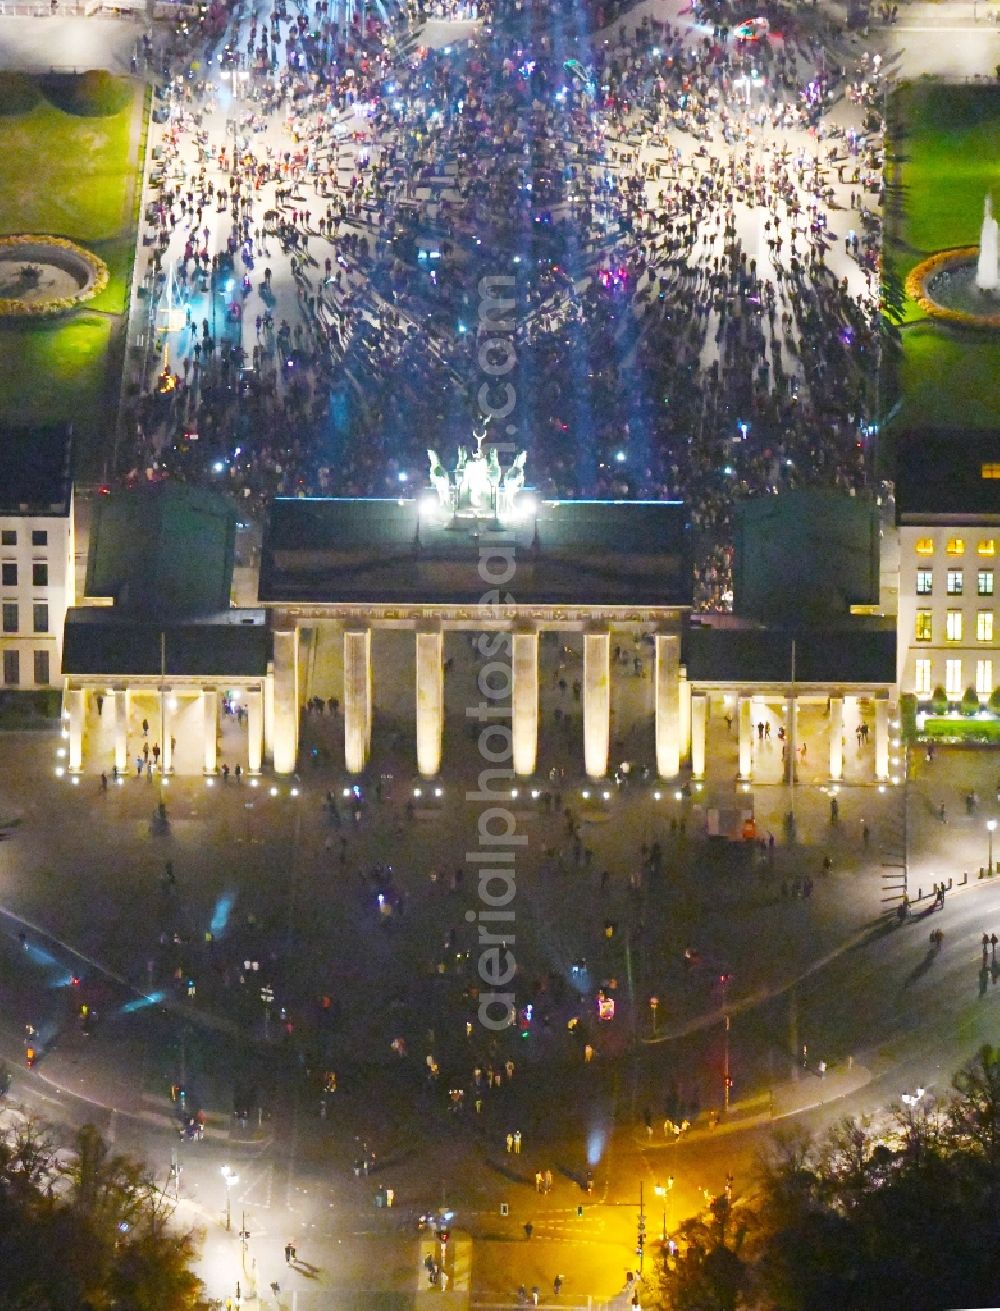 Berlin at night from the bird perspective: Night lighting Tourist attraction of the historic monument Brandenburger Tor on Pariser Platz - Unter den Linden in the district Mitte in Berlin, Germany